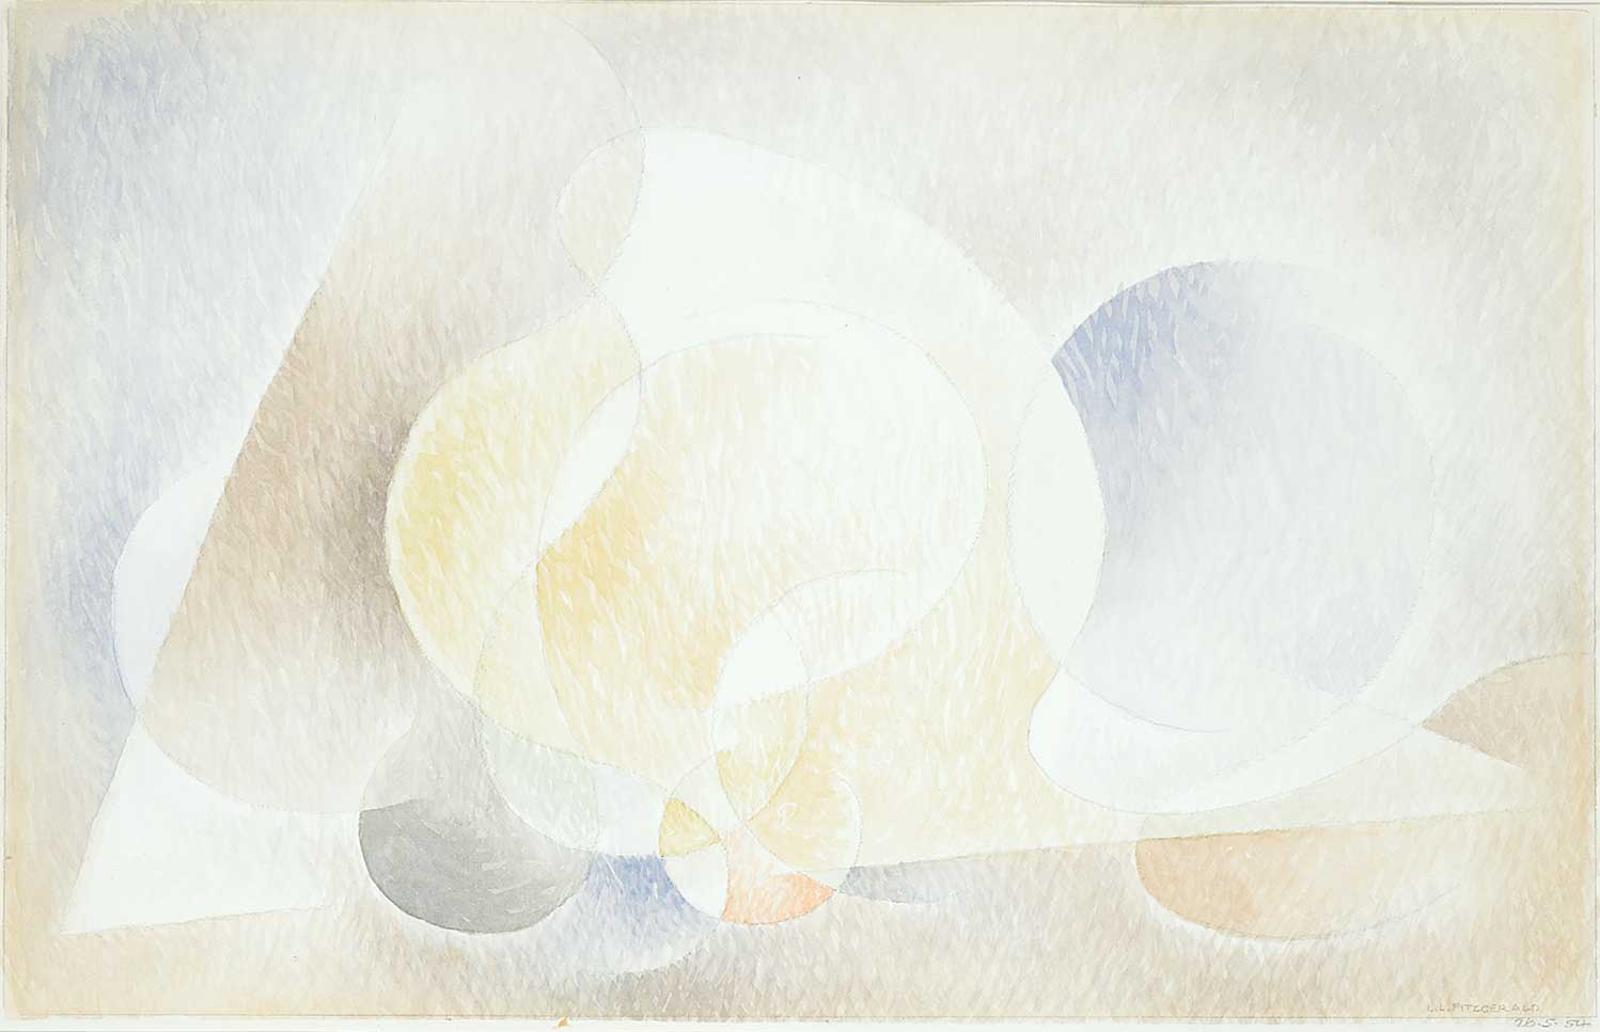 Lionel Lemoine FitzGerald (1890-1956) - Untitled - Abstract Cosmic Forms